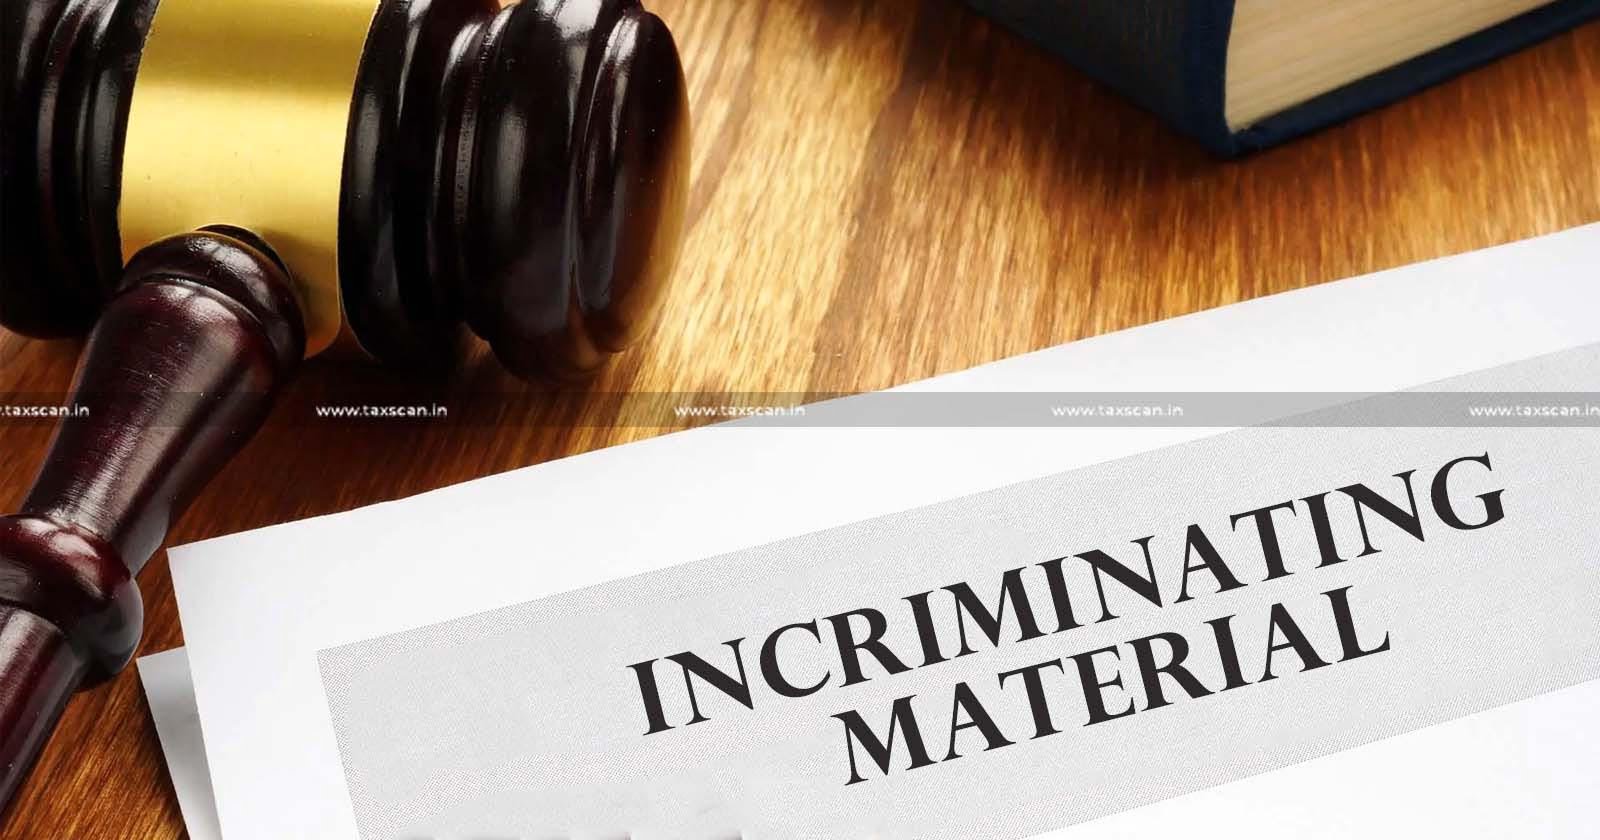 Incriminating Material - Absence of Incriminating Material - Addition - ITAT dismisses Appeal - ITAT - Appeal - taxscan